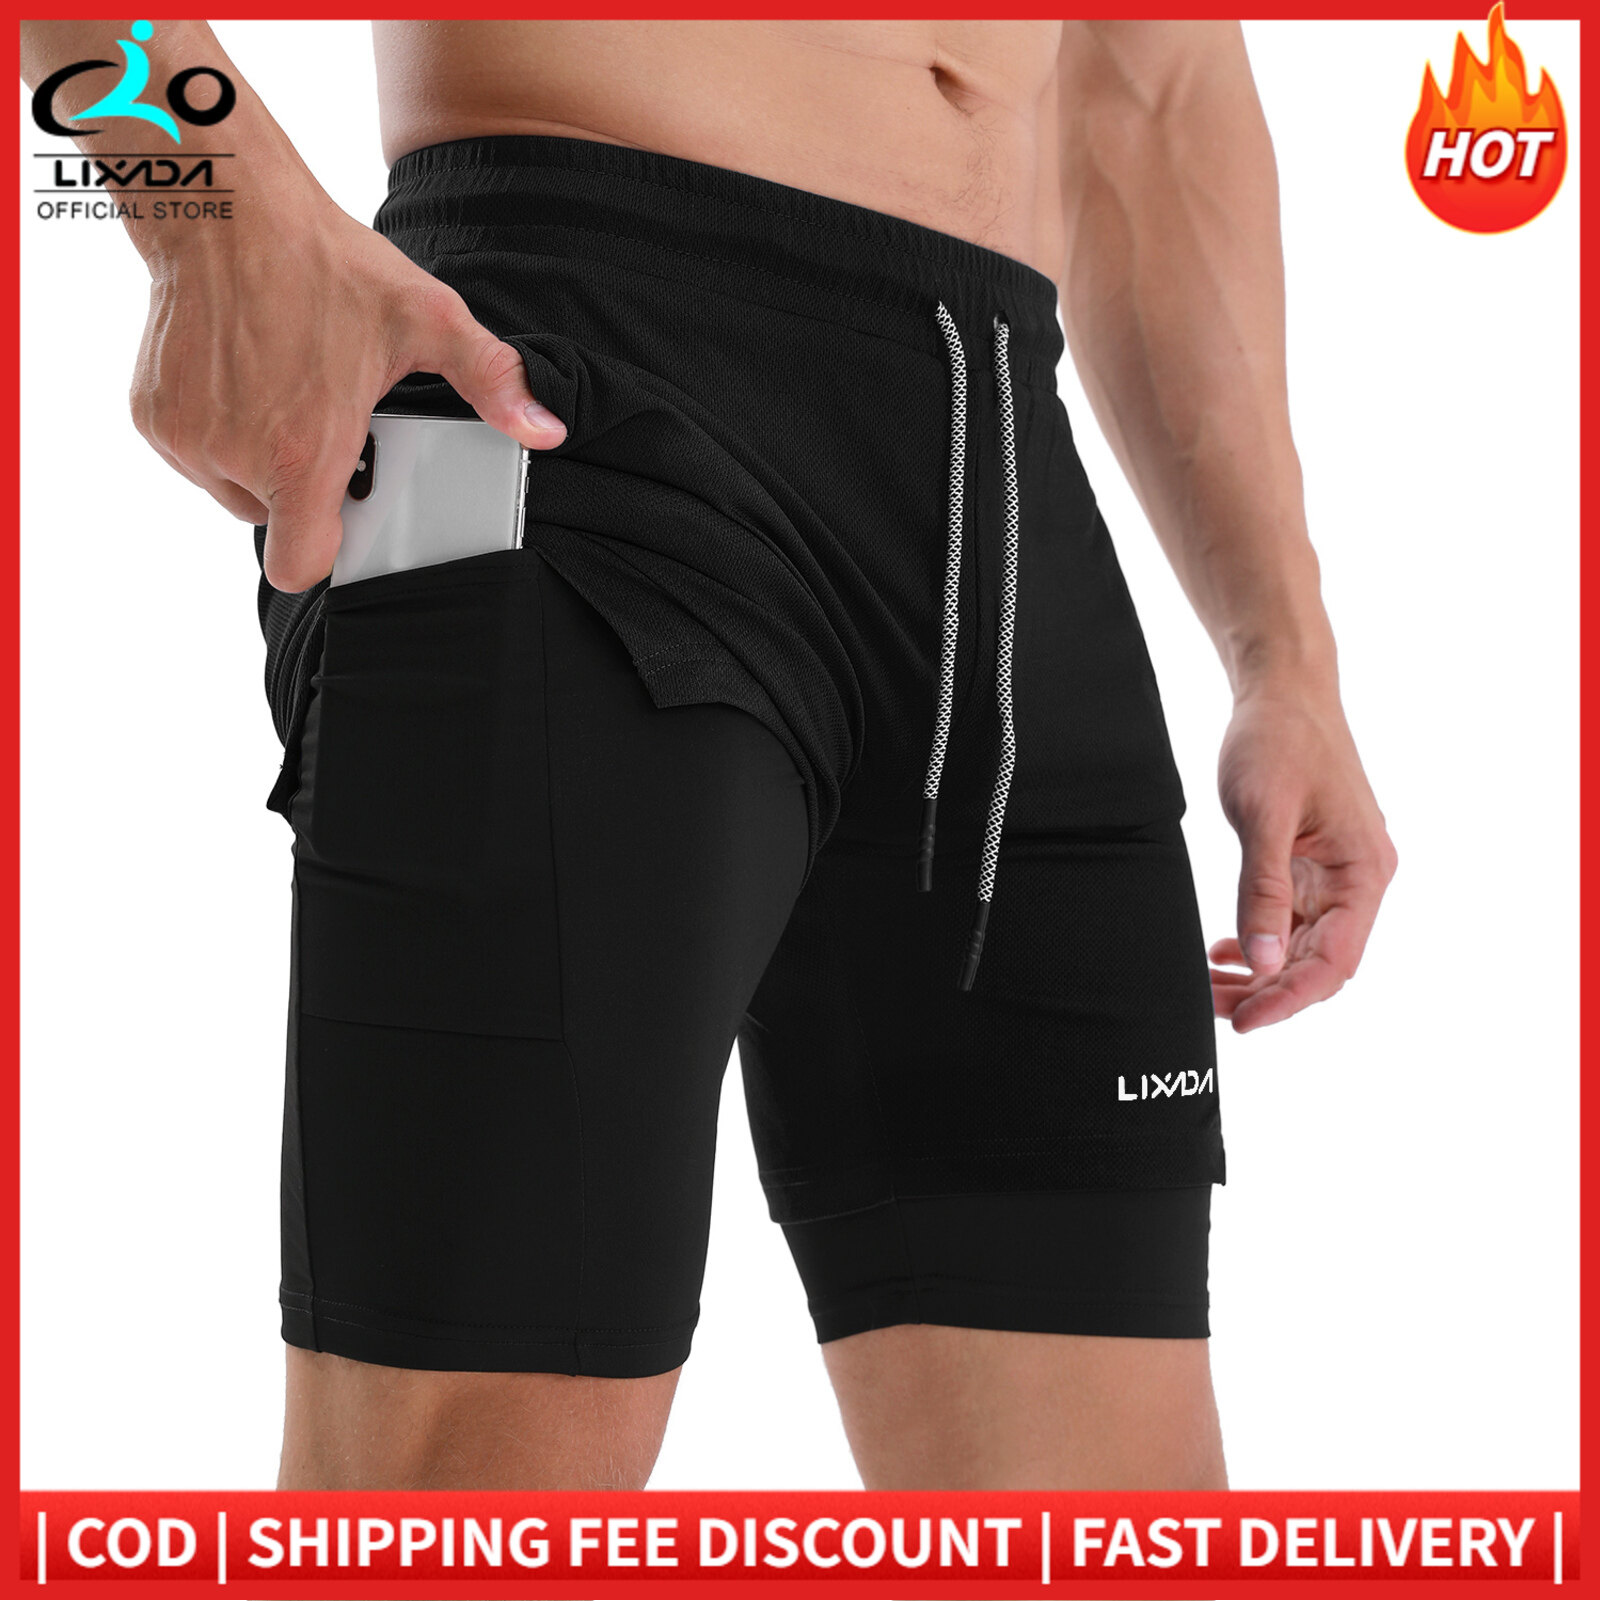 Lixada 2-in-1 Men Running Shorts with Towel Loop Quick Dry Exercise Shorts